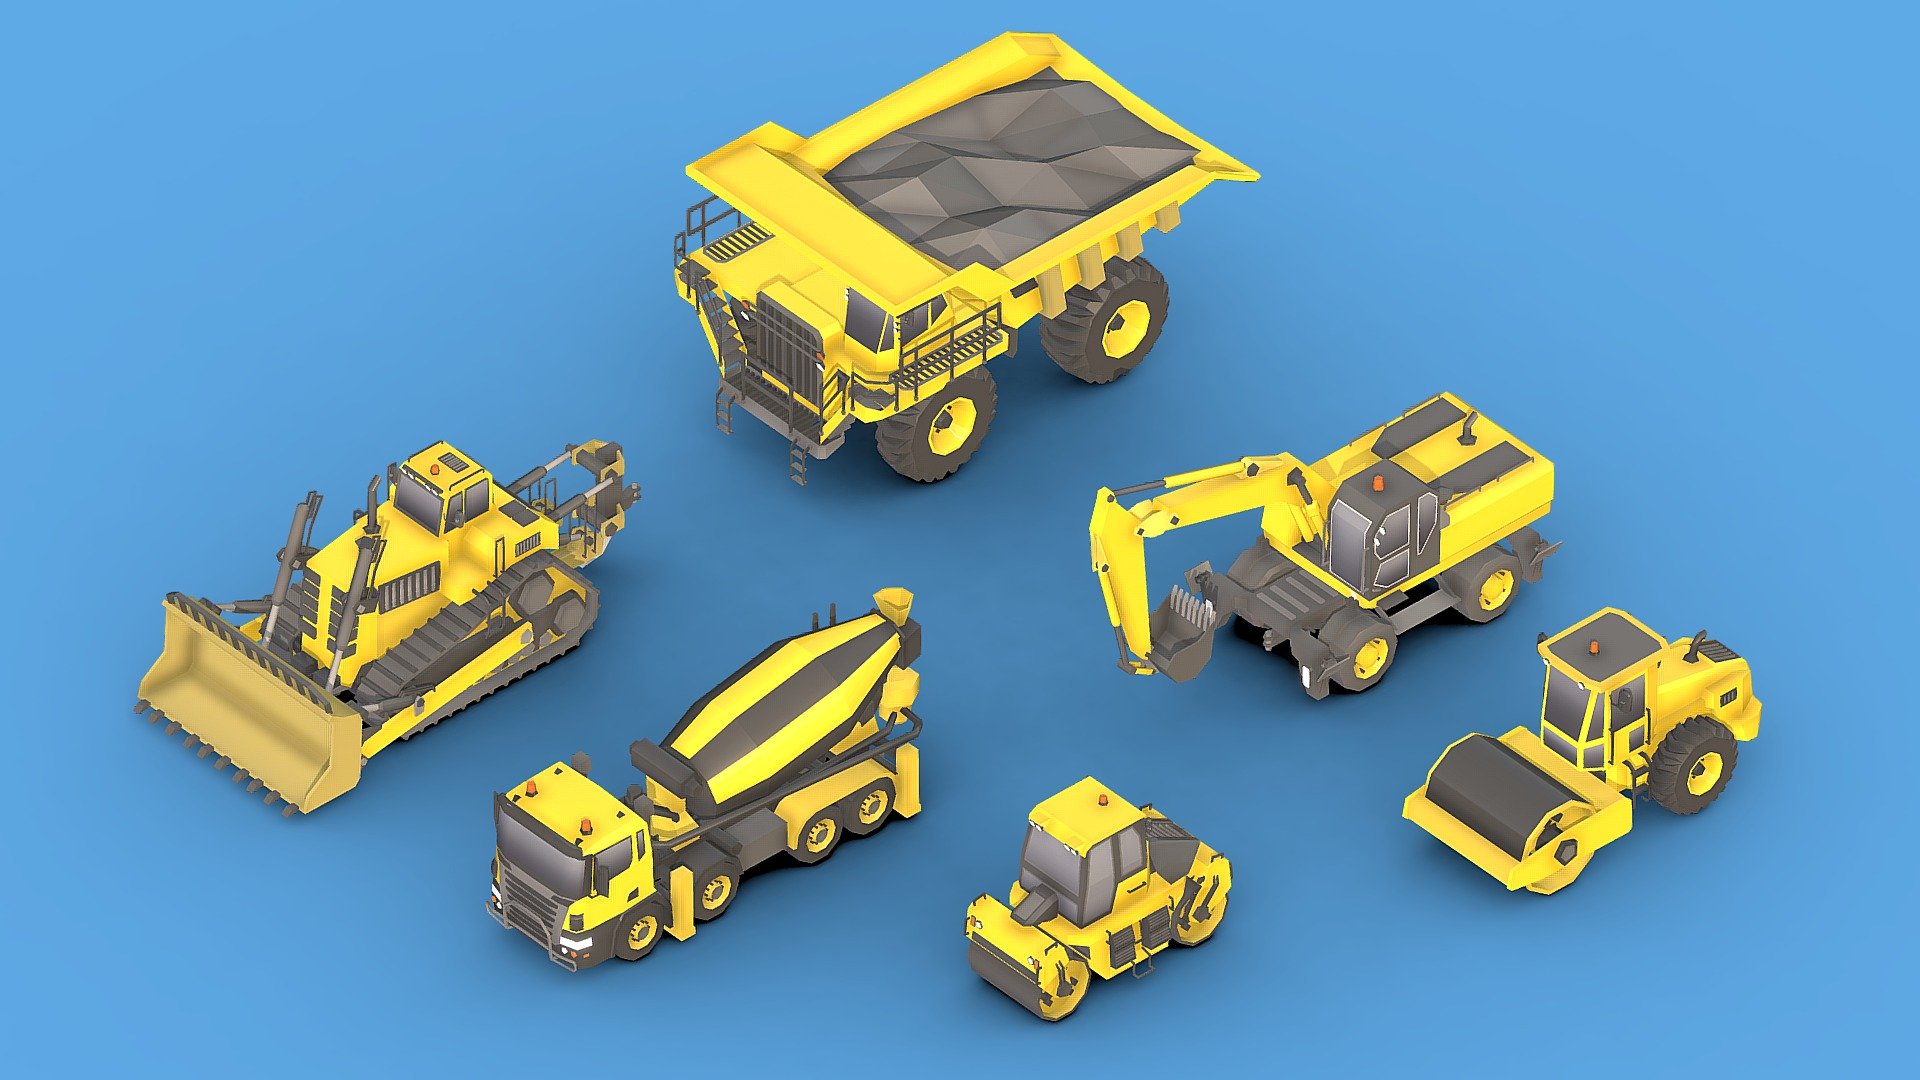 Collection Construction Vehicles Low- Poly_1

This package includes 6 vehicles.

You can use these models in any game and project.

This model is made with order and precision.

Textures format is PNG.

Separated parts (body. wheels).

Very low poly.

Low poly (Mobile Optimized).

Vehicles have separate parts.

Average poly count: 3/000 Tris.

Texture size: 256(PNG).

Each model has 1 textures .

Each model has 1 materials .

The parts are separated.

format: fbx, obj, 3d max - Collection Construction Vehicles Low- Poly_1 - Buy Royalty Free 3D model by Sidra (@Sidramax) 3d model